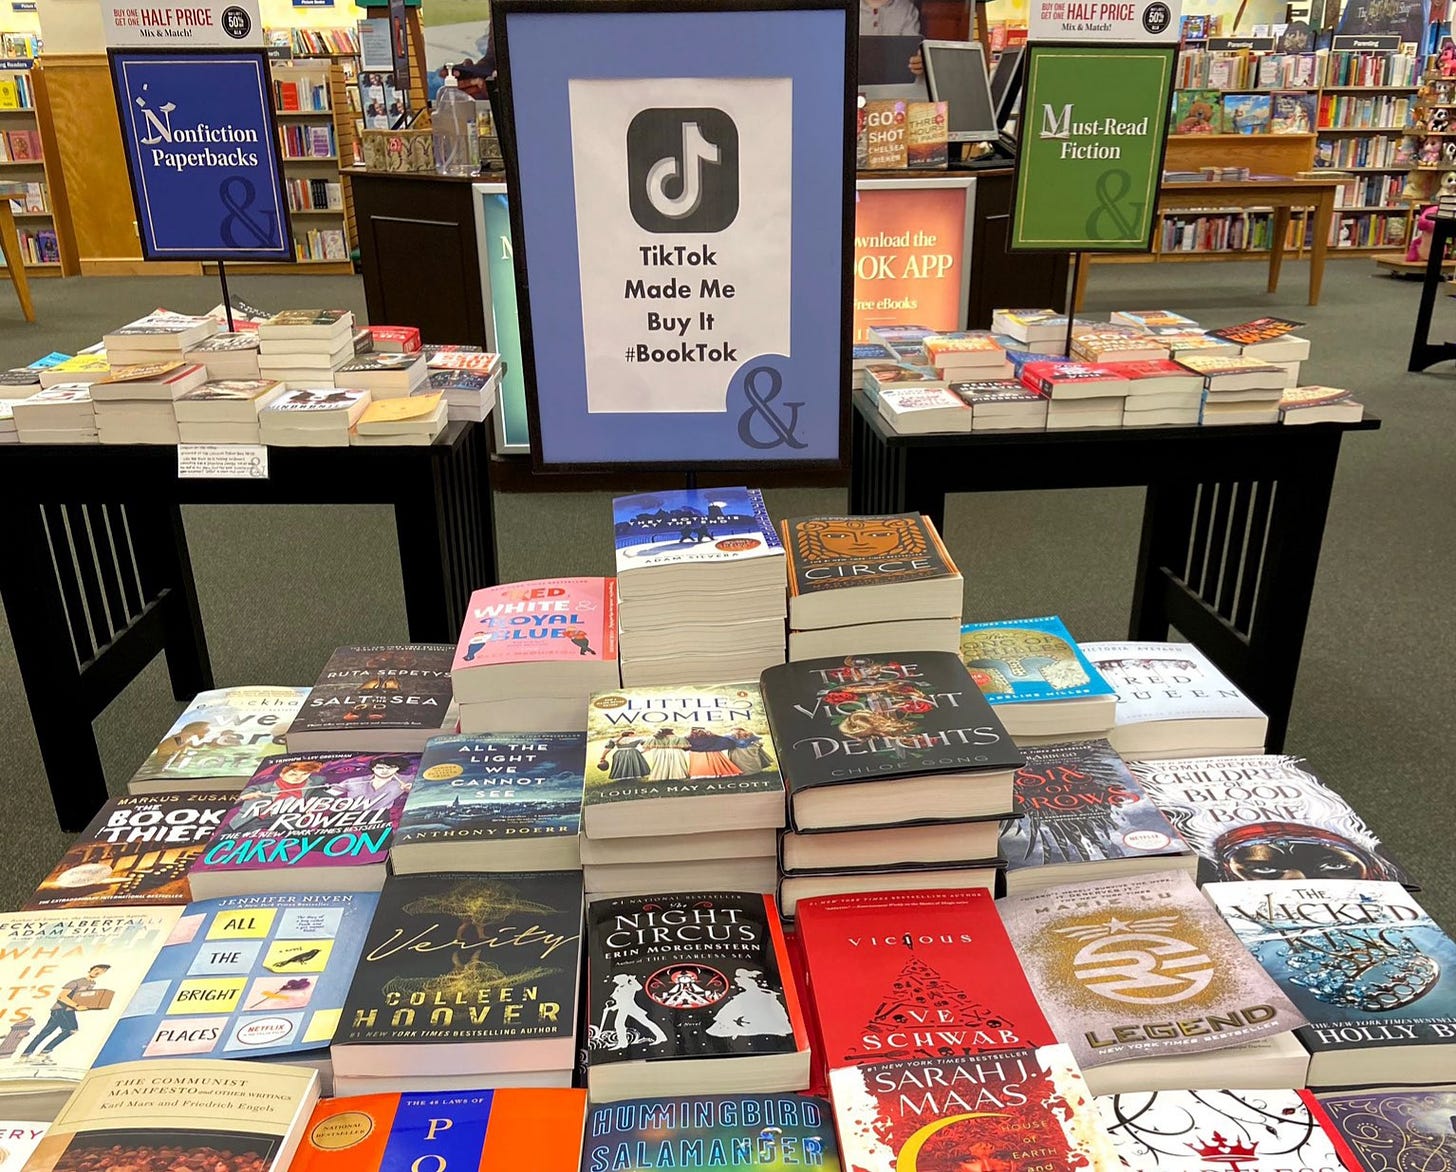 A table in a bookstore with a sign that says "TikTok made me buy it"